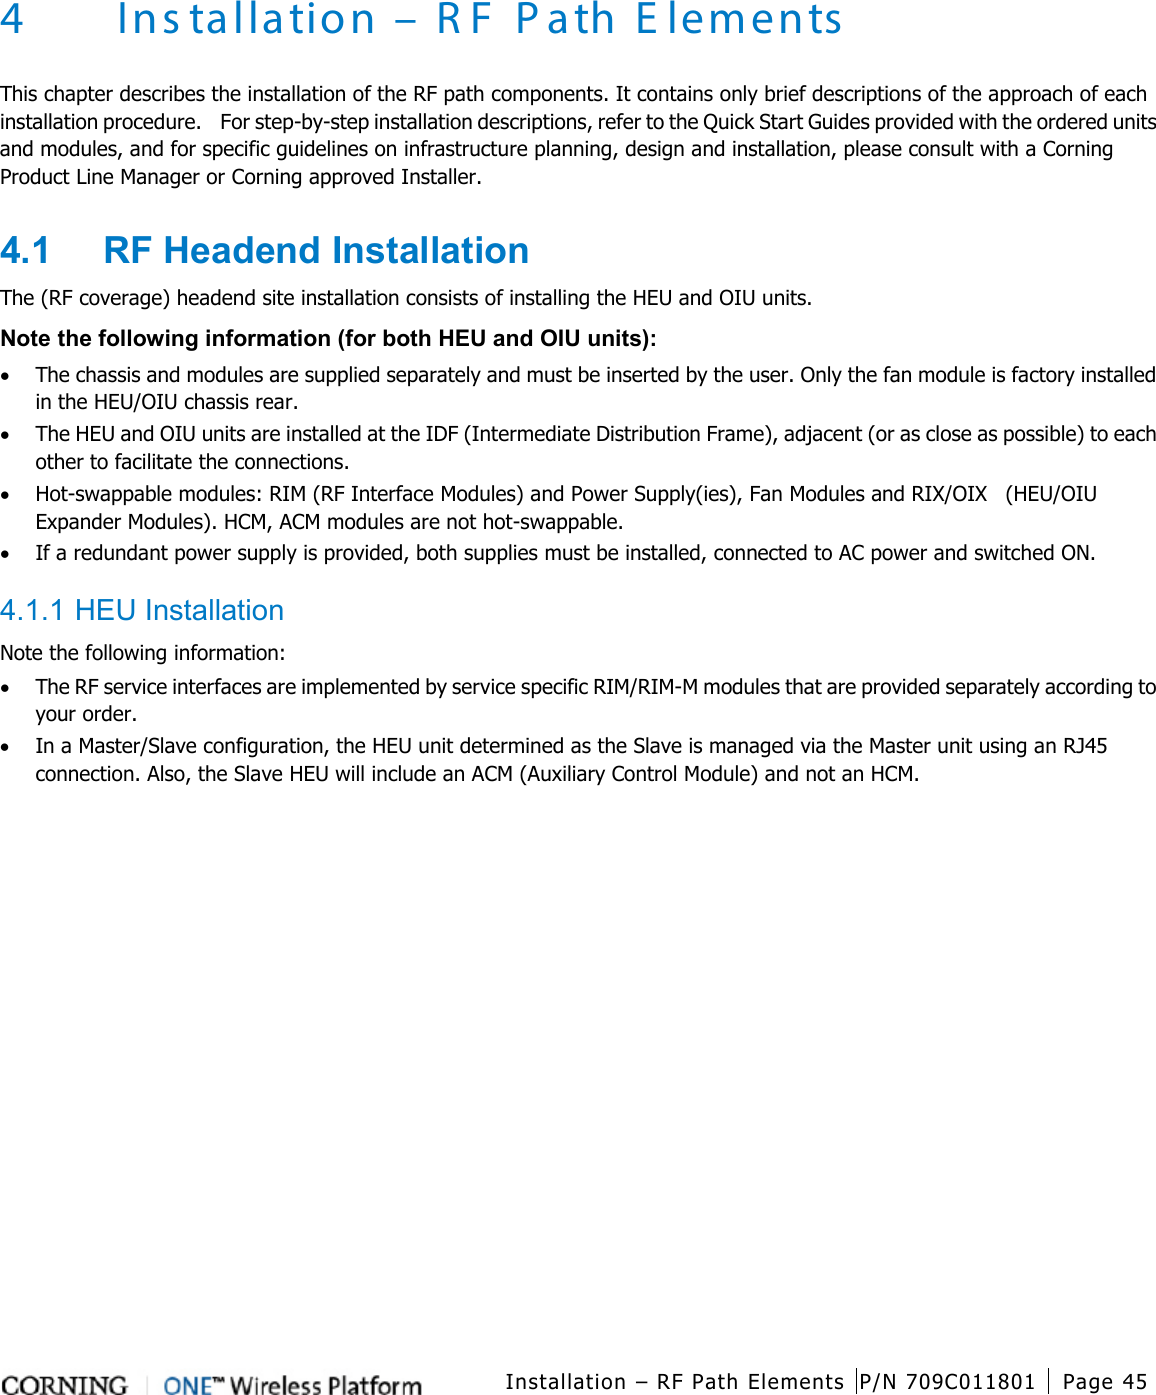   Installation – RF Path Elements P/N 709C011801 Page 45   4 Ins tallation – R F Path E lements This chapter describes the installation of the RF path components. It contains only brief descriptions of the approach of each installation procedure.  For step-by-step installation descriptions, refer to the Quick Start Guides provided with the ordered units and modules, and for specific guidelines on infrastructure planning, design and installation, please consult with a Corning Product Line Manager or Corning approved Installer. 4.1  RF Headend Installation The (RF coverage) headend site installation consists of installing the HEU and OIU units. Note the following information (for both HEU and OIU units): • The chassis and modules are supplied separately and must be inserted by the user. Only the fan module is factory installed in the HEU/OIU chassis rear.   • The HEU and OIU units are installed at the IDF (Intermediate Distribution Frame), adjacent (or as close as possible) to each other to facilitate the connections. • Hot-swappable modules: RIM (RF Interface Modules) and Power Supply(ies), Fan Modules and RIX/OIX    (HEU/OIU Expander Modules). HCM, ACM modules are not hot-swappable. • If a redundant power supply is provided, both supplies must be installed, connected to AC power and switched ON.  4.1.1 HEU Installation Note the following information: • The RF service interfaces are implemented by service specific RIM/RIM-M modules that are provided separately according to your order. • In a Master/Slave configuration, the HEU unit determined as the Slave is managed via the Master unit using an RJ45 connection. Also, the Slave HEU will include an ACM (Auxiliary Control Module) and not an HCM.   